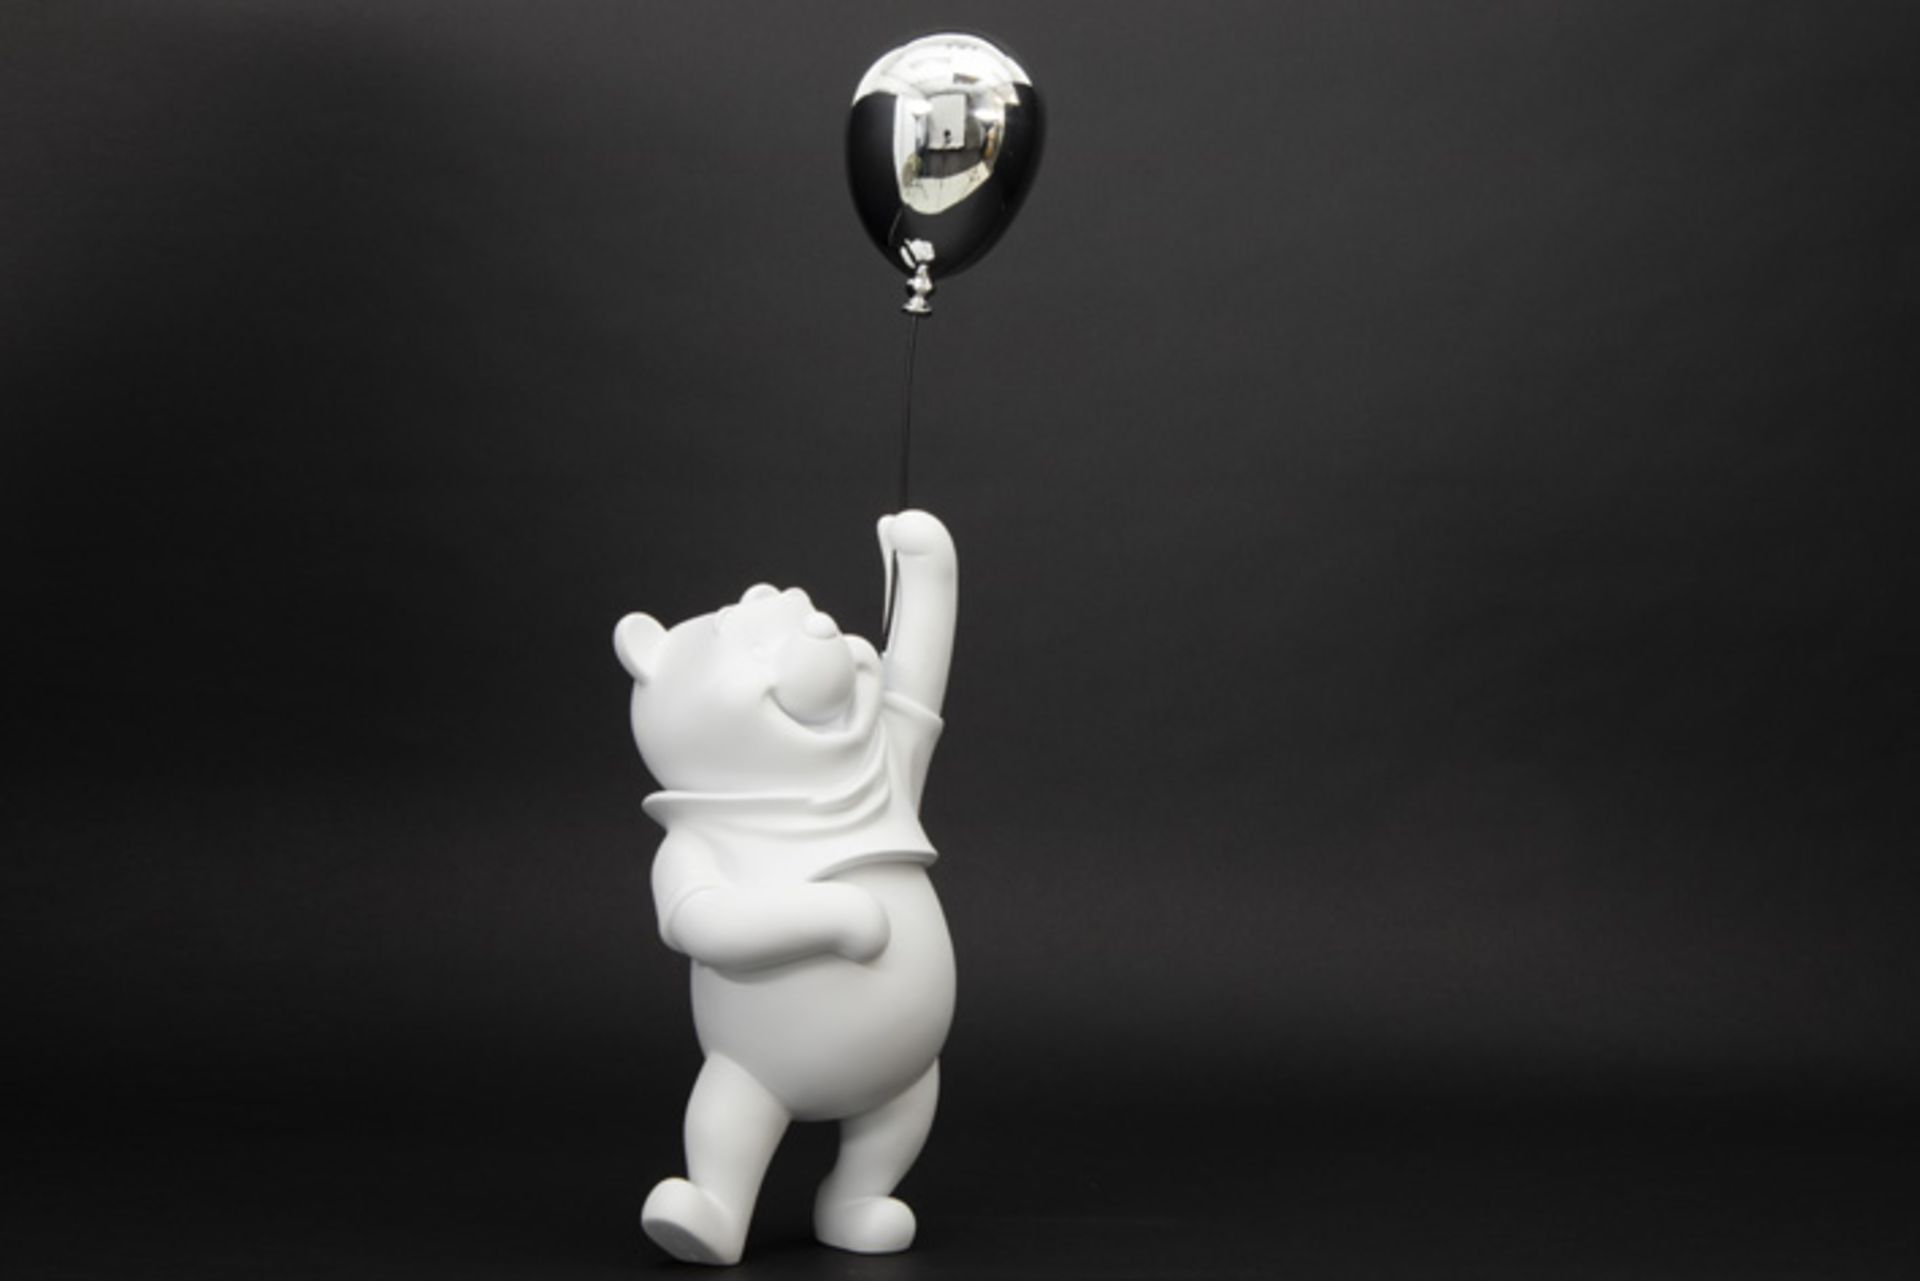 Leblon Delienne & Disney "Winnie the Pooh White and Silver" sculpture n° 10/500 after A.A. Milne